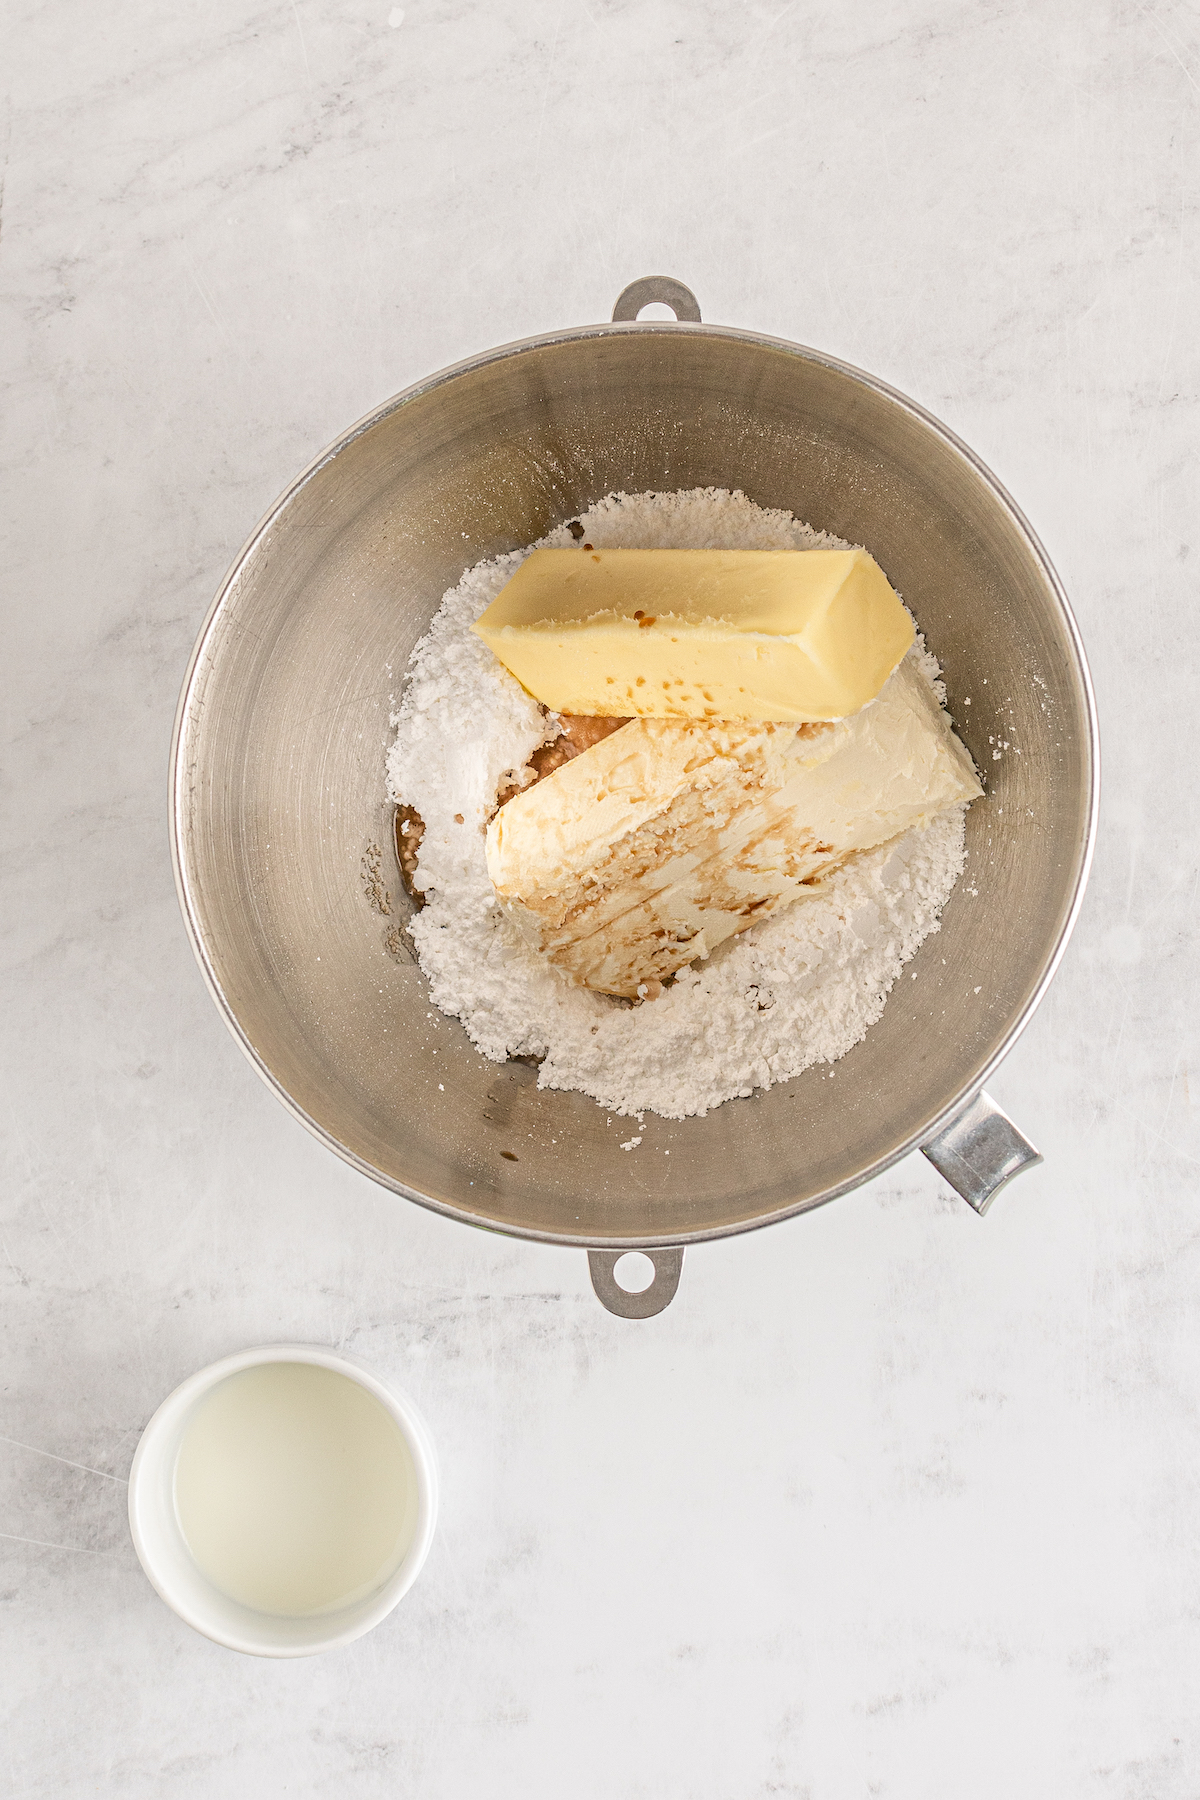 Butter, powdered sugar, and other frosting ingredients in a mixing bowl.